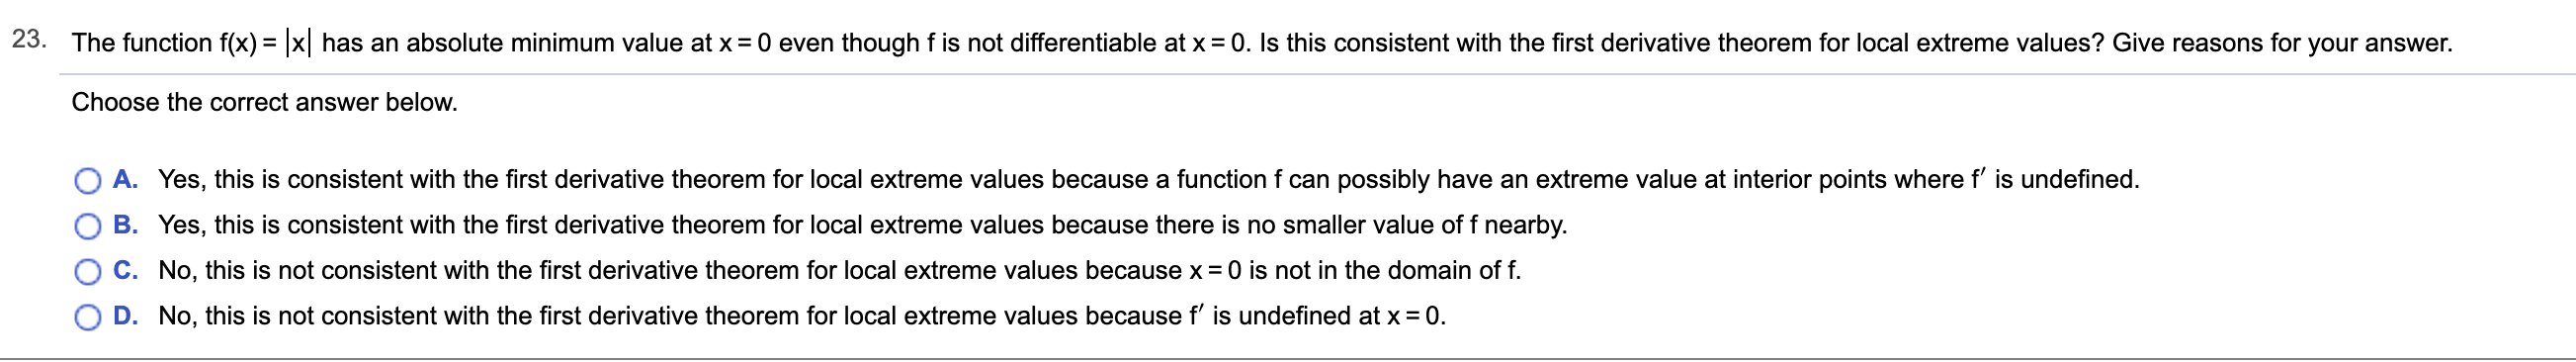 23.
The function f(x) =x has an absolute minimum value at x
0 even though f is not differentiable at x = 0. Is this consistent with the first derivative theorem for local extreme values? Give reasons for your answer.
Choose the correct answer below.
A. Yes, this is consistent with the first derivative theorem for local extreme values because a function f can possibly have an extreme value at interior points where f' is undefined.
B. Yes, this is consistent with the first derivative theorem for local extreme values because there is no smaller value of f nearby.
C. No, this is not consistent with the first derivative theorem for local extreme values because x 0 is not in the domain of f
D. No, this is not consistent with the first derivative theorem for local extreme values because f' is undefined at x 0
